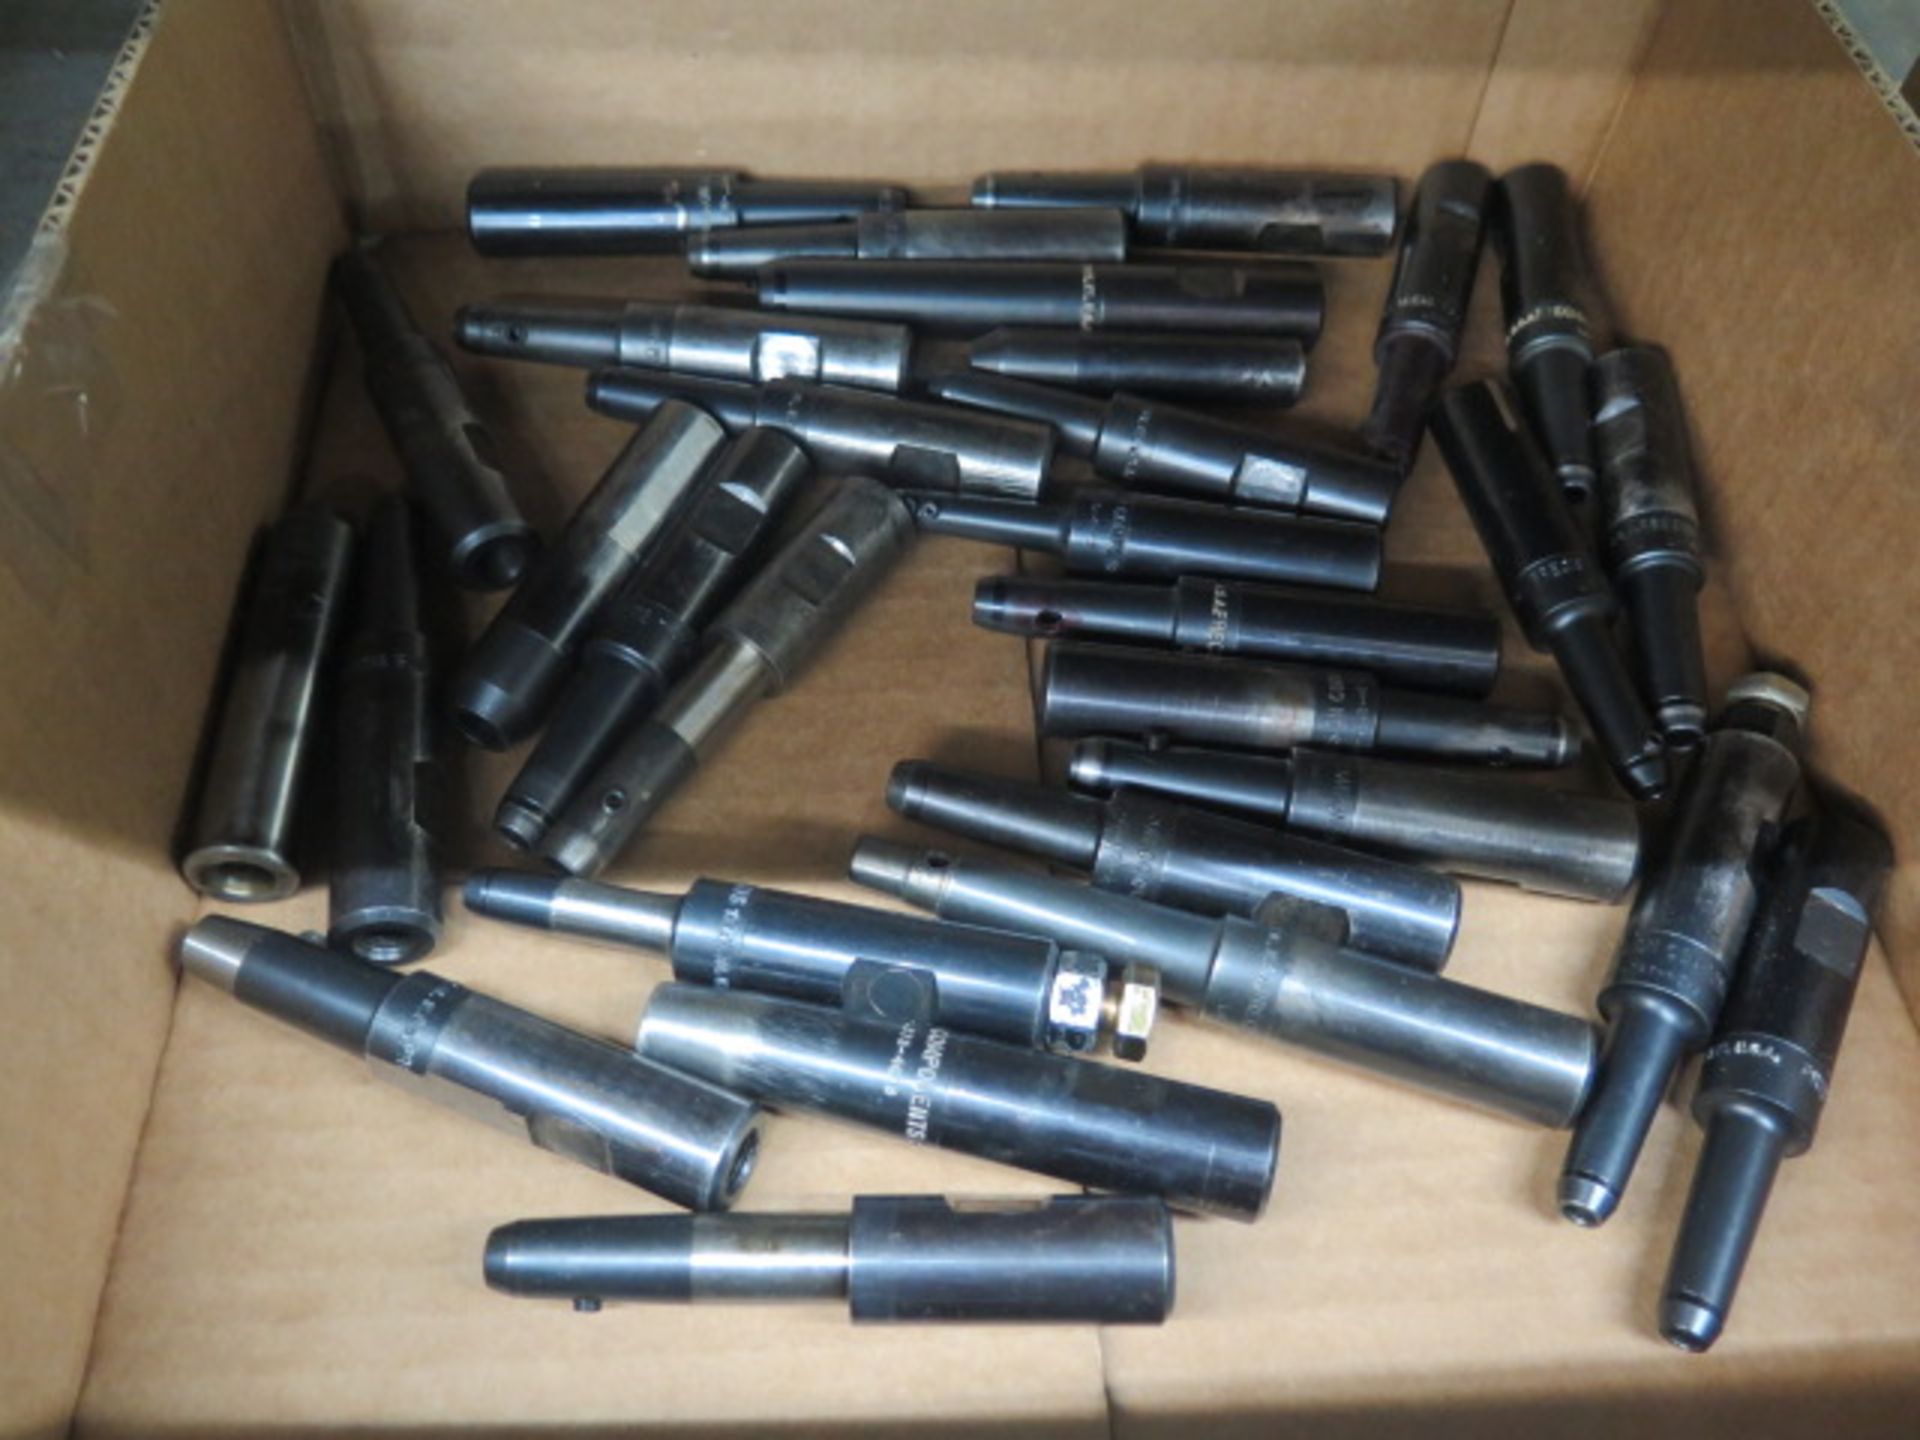 Endmill Holders - Image 2 of 2